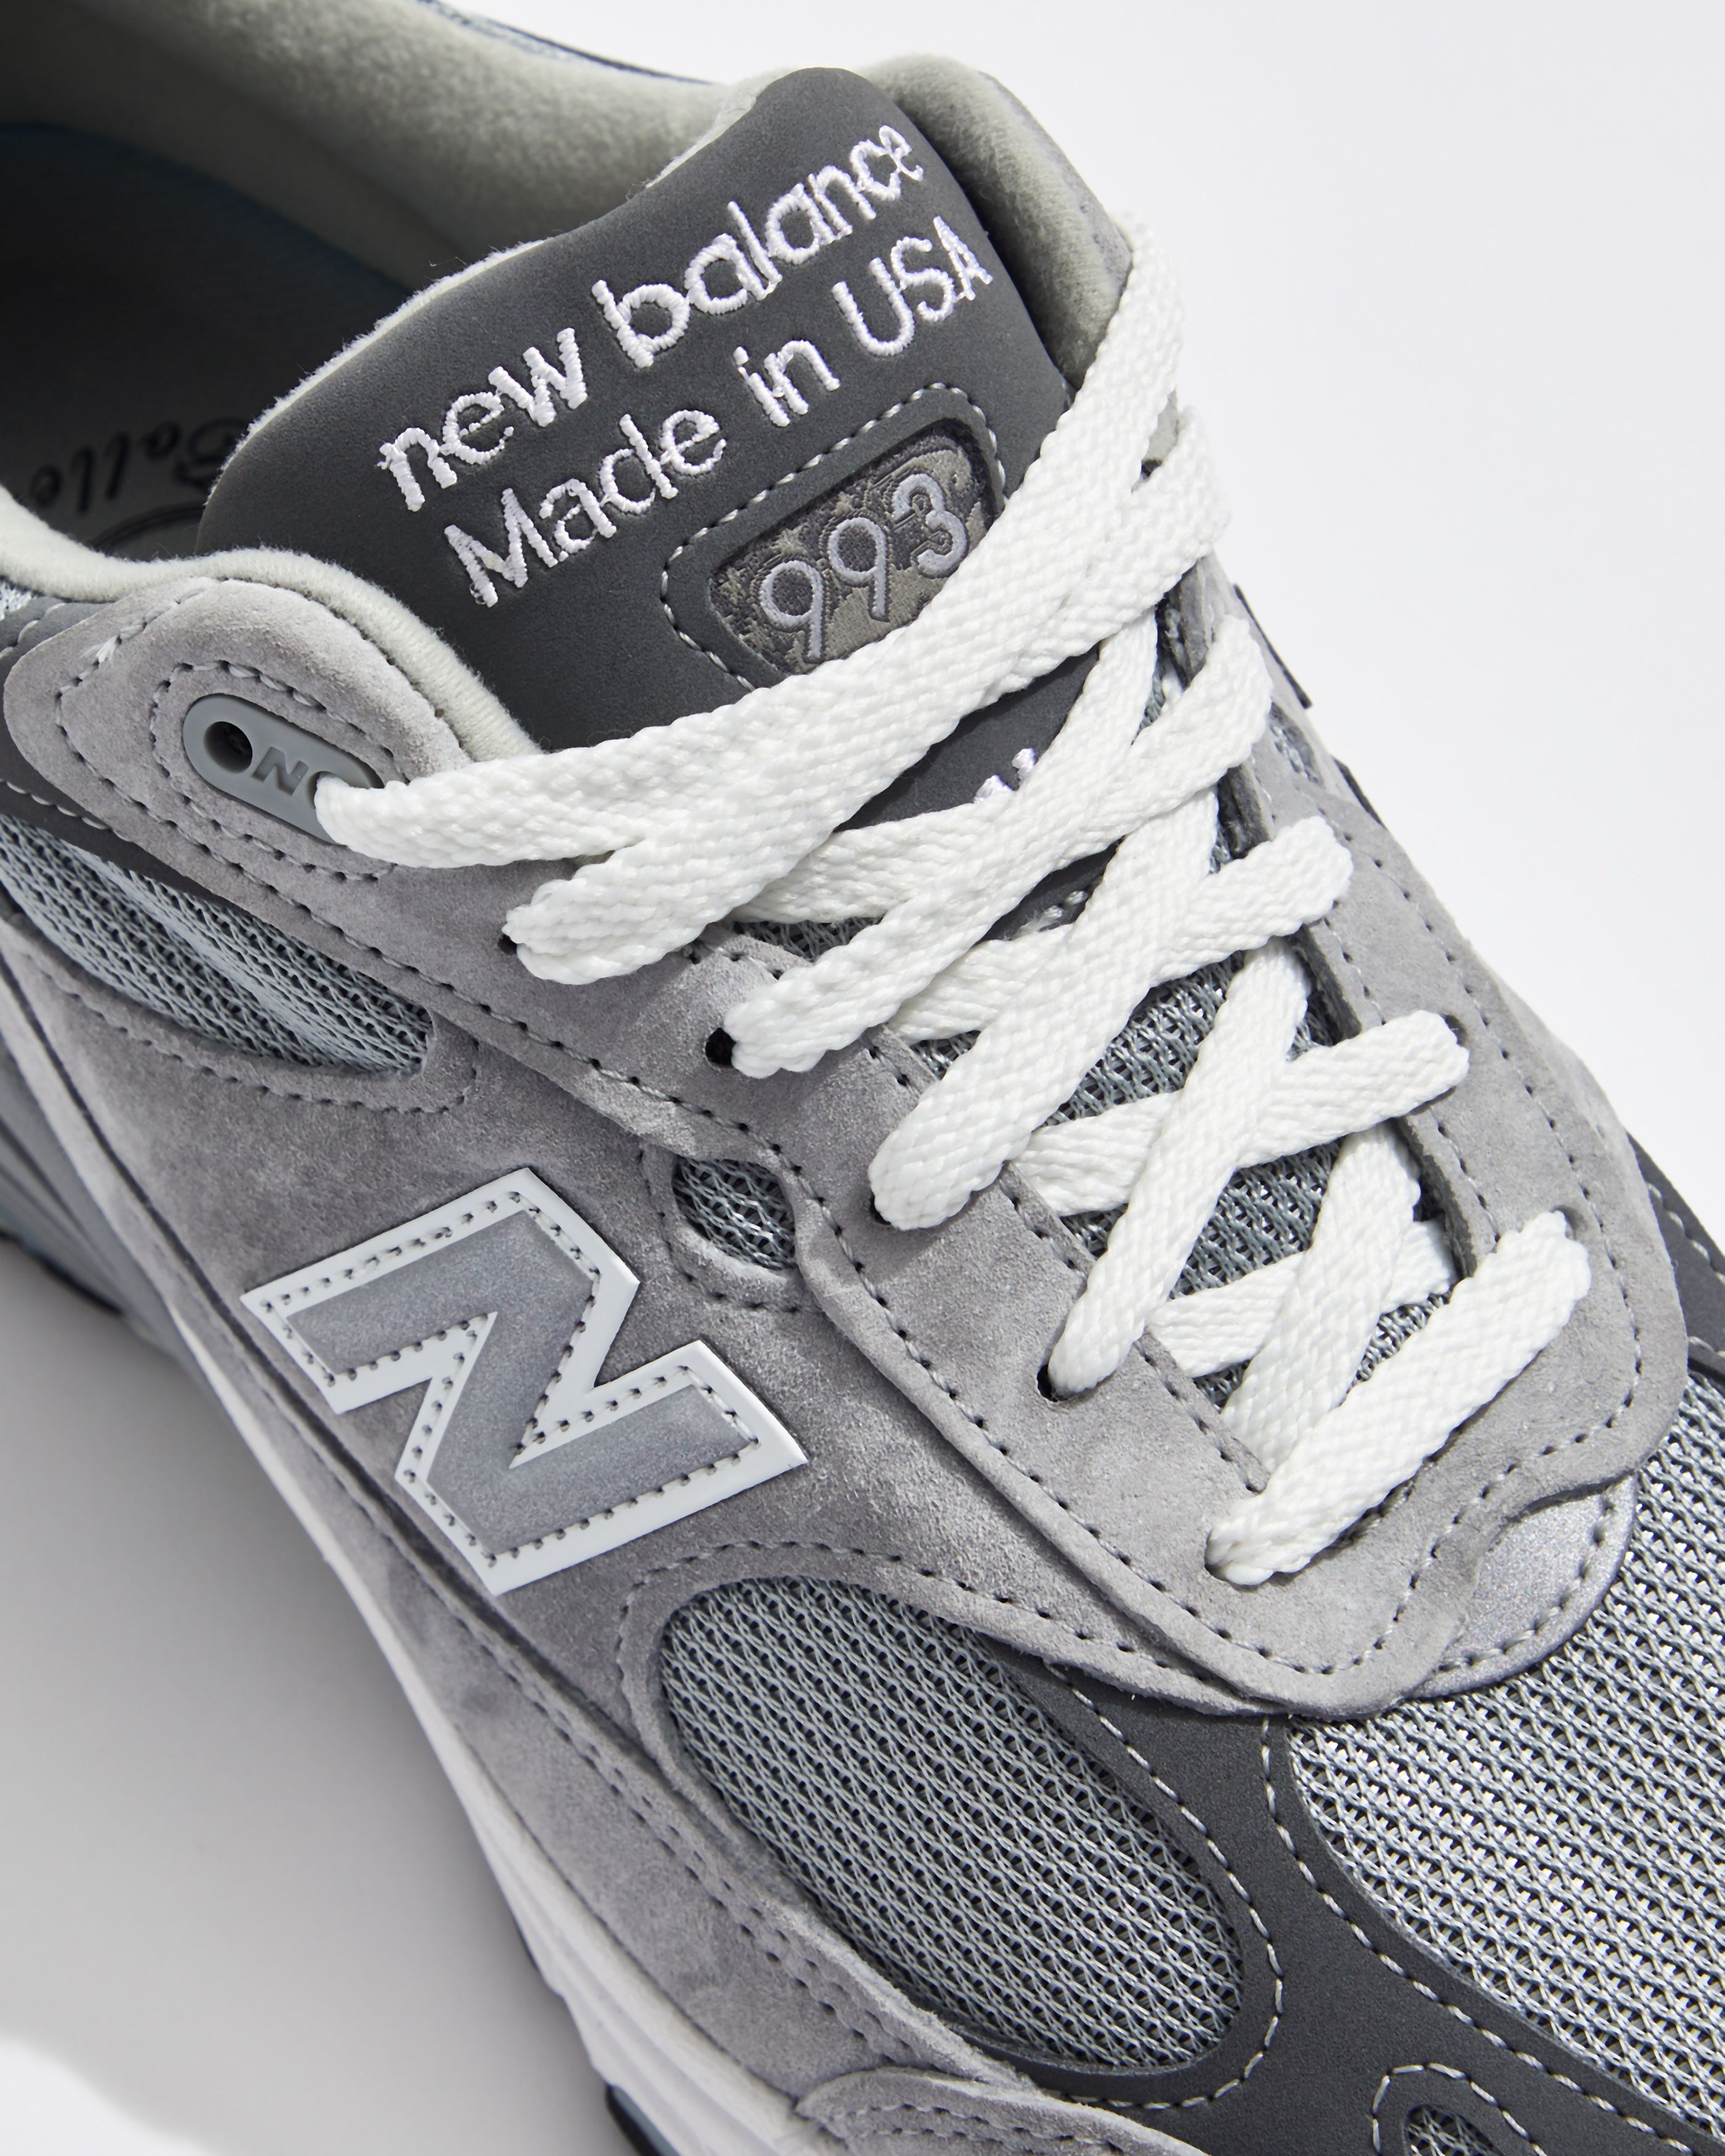 new balance made in usa review